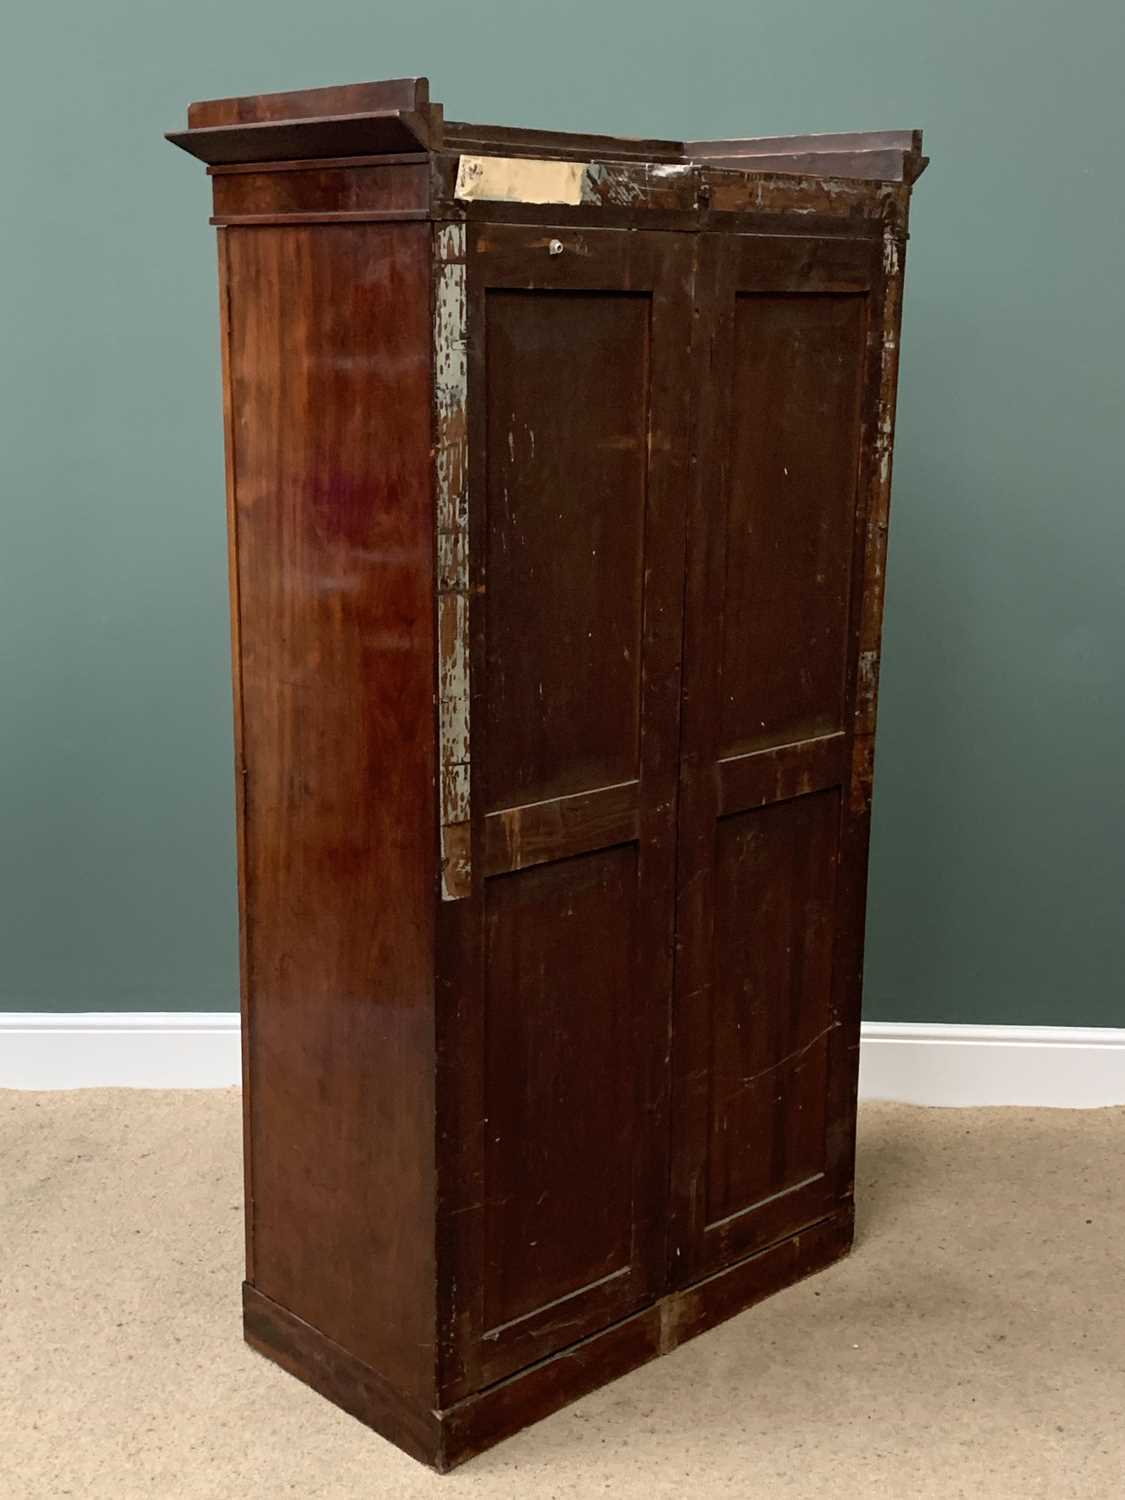 ANTIQUE WALNUT WARDROBE, two door neat example, 182cms H, 99cms W, 51cms D - Image 3 of 3